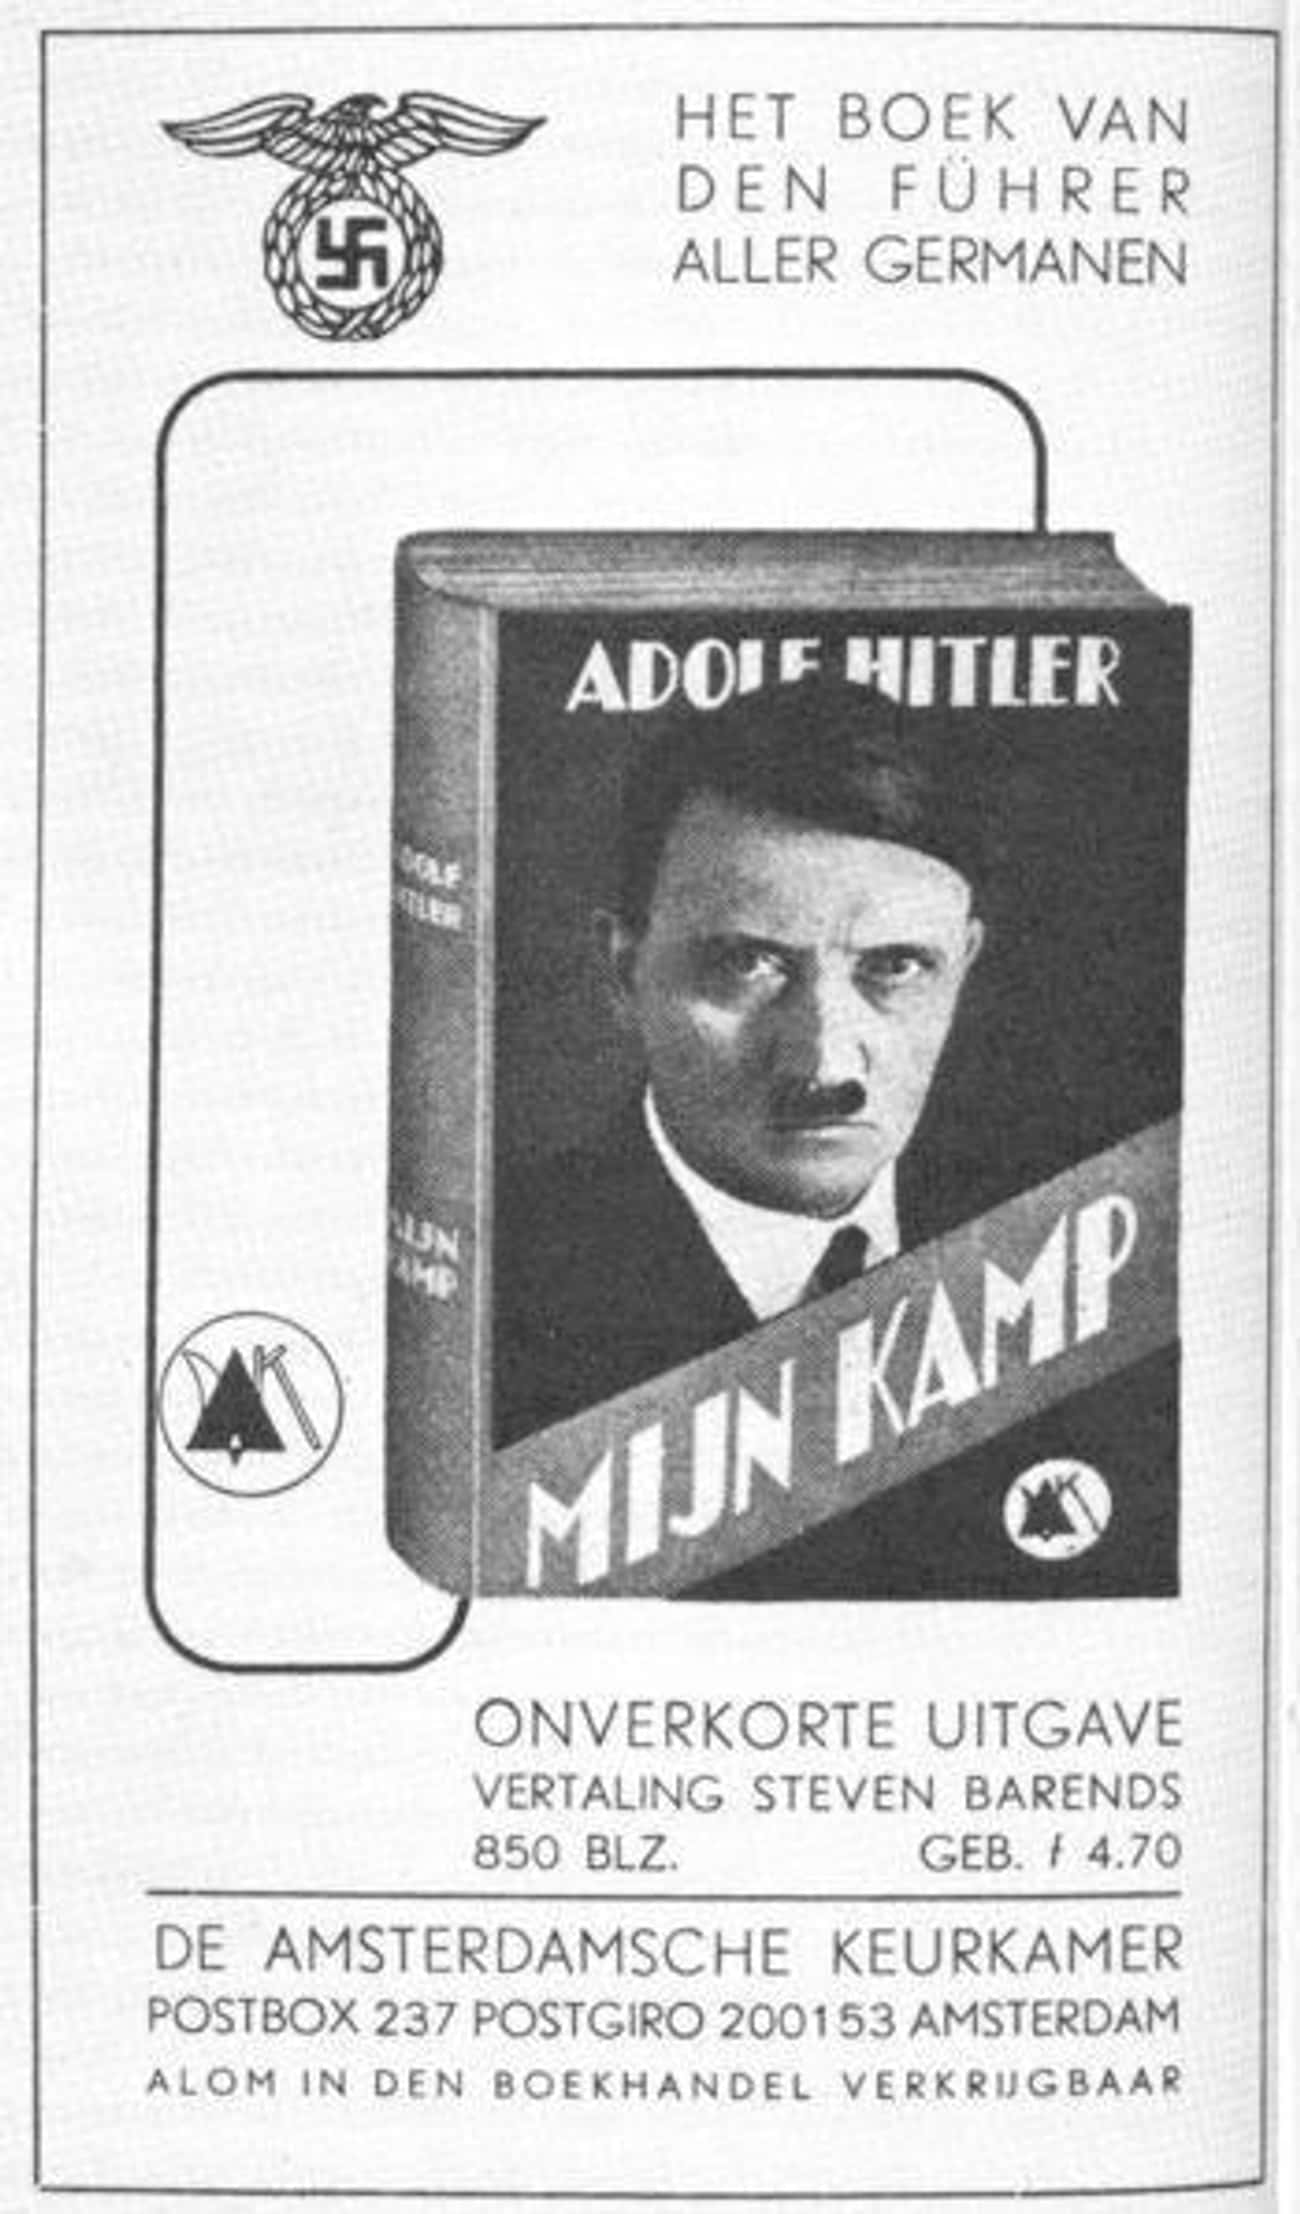 Mein Kampf Is Published in 1925